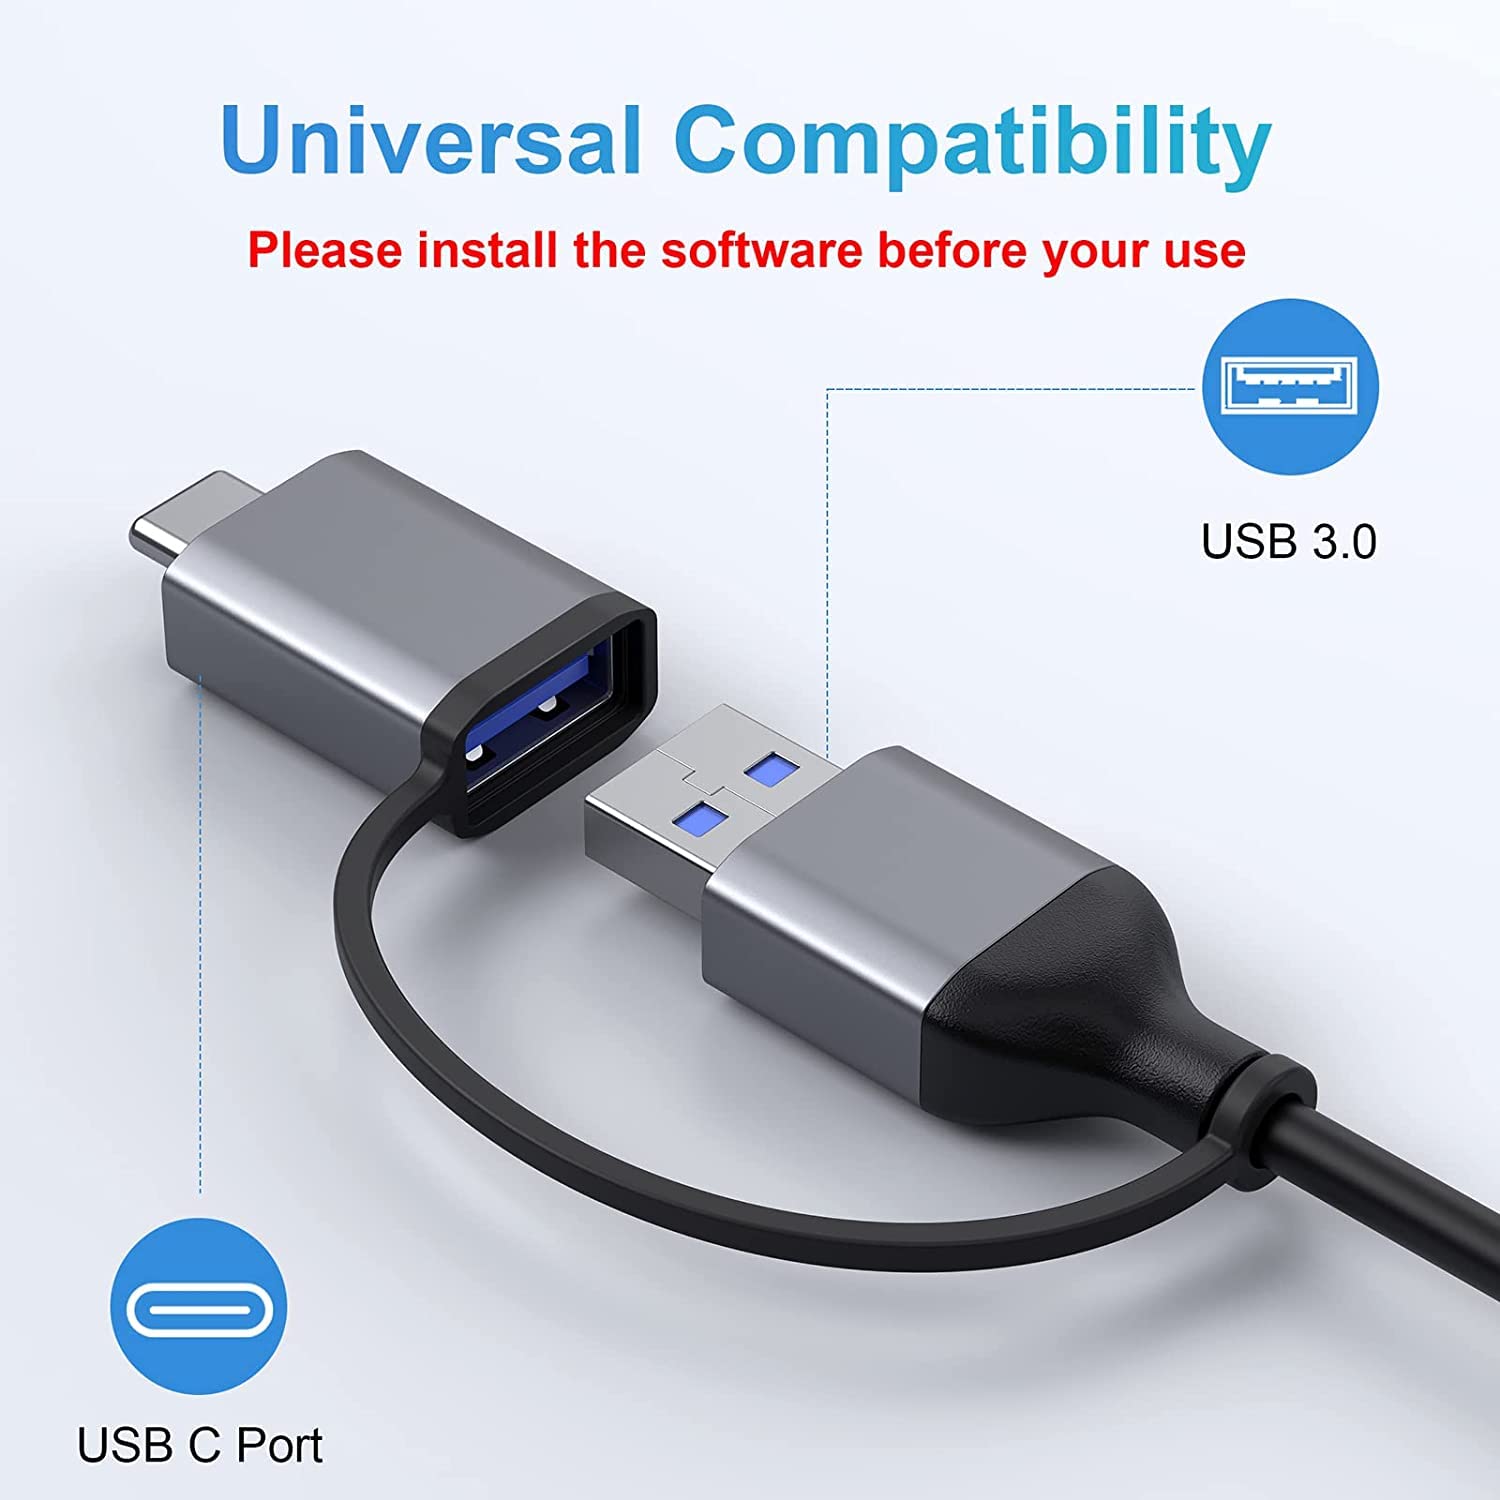 USB C to Dual HDMI Adapter, 4 in 1 USB Type C Hub with 2 HDMI/USB3.0 /PD  Charging, Dual Screen Display USB-C Docking Station for Windows, MacOS